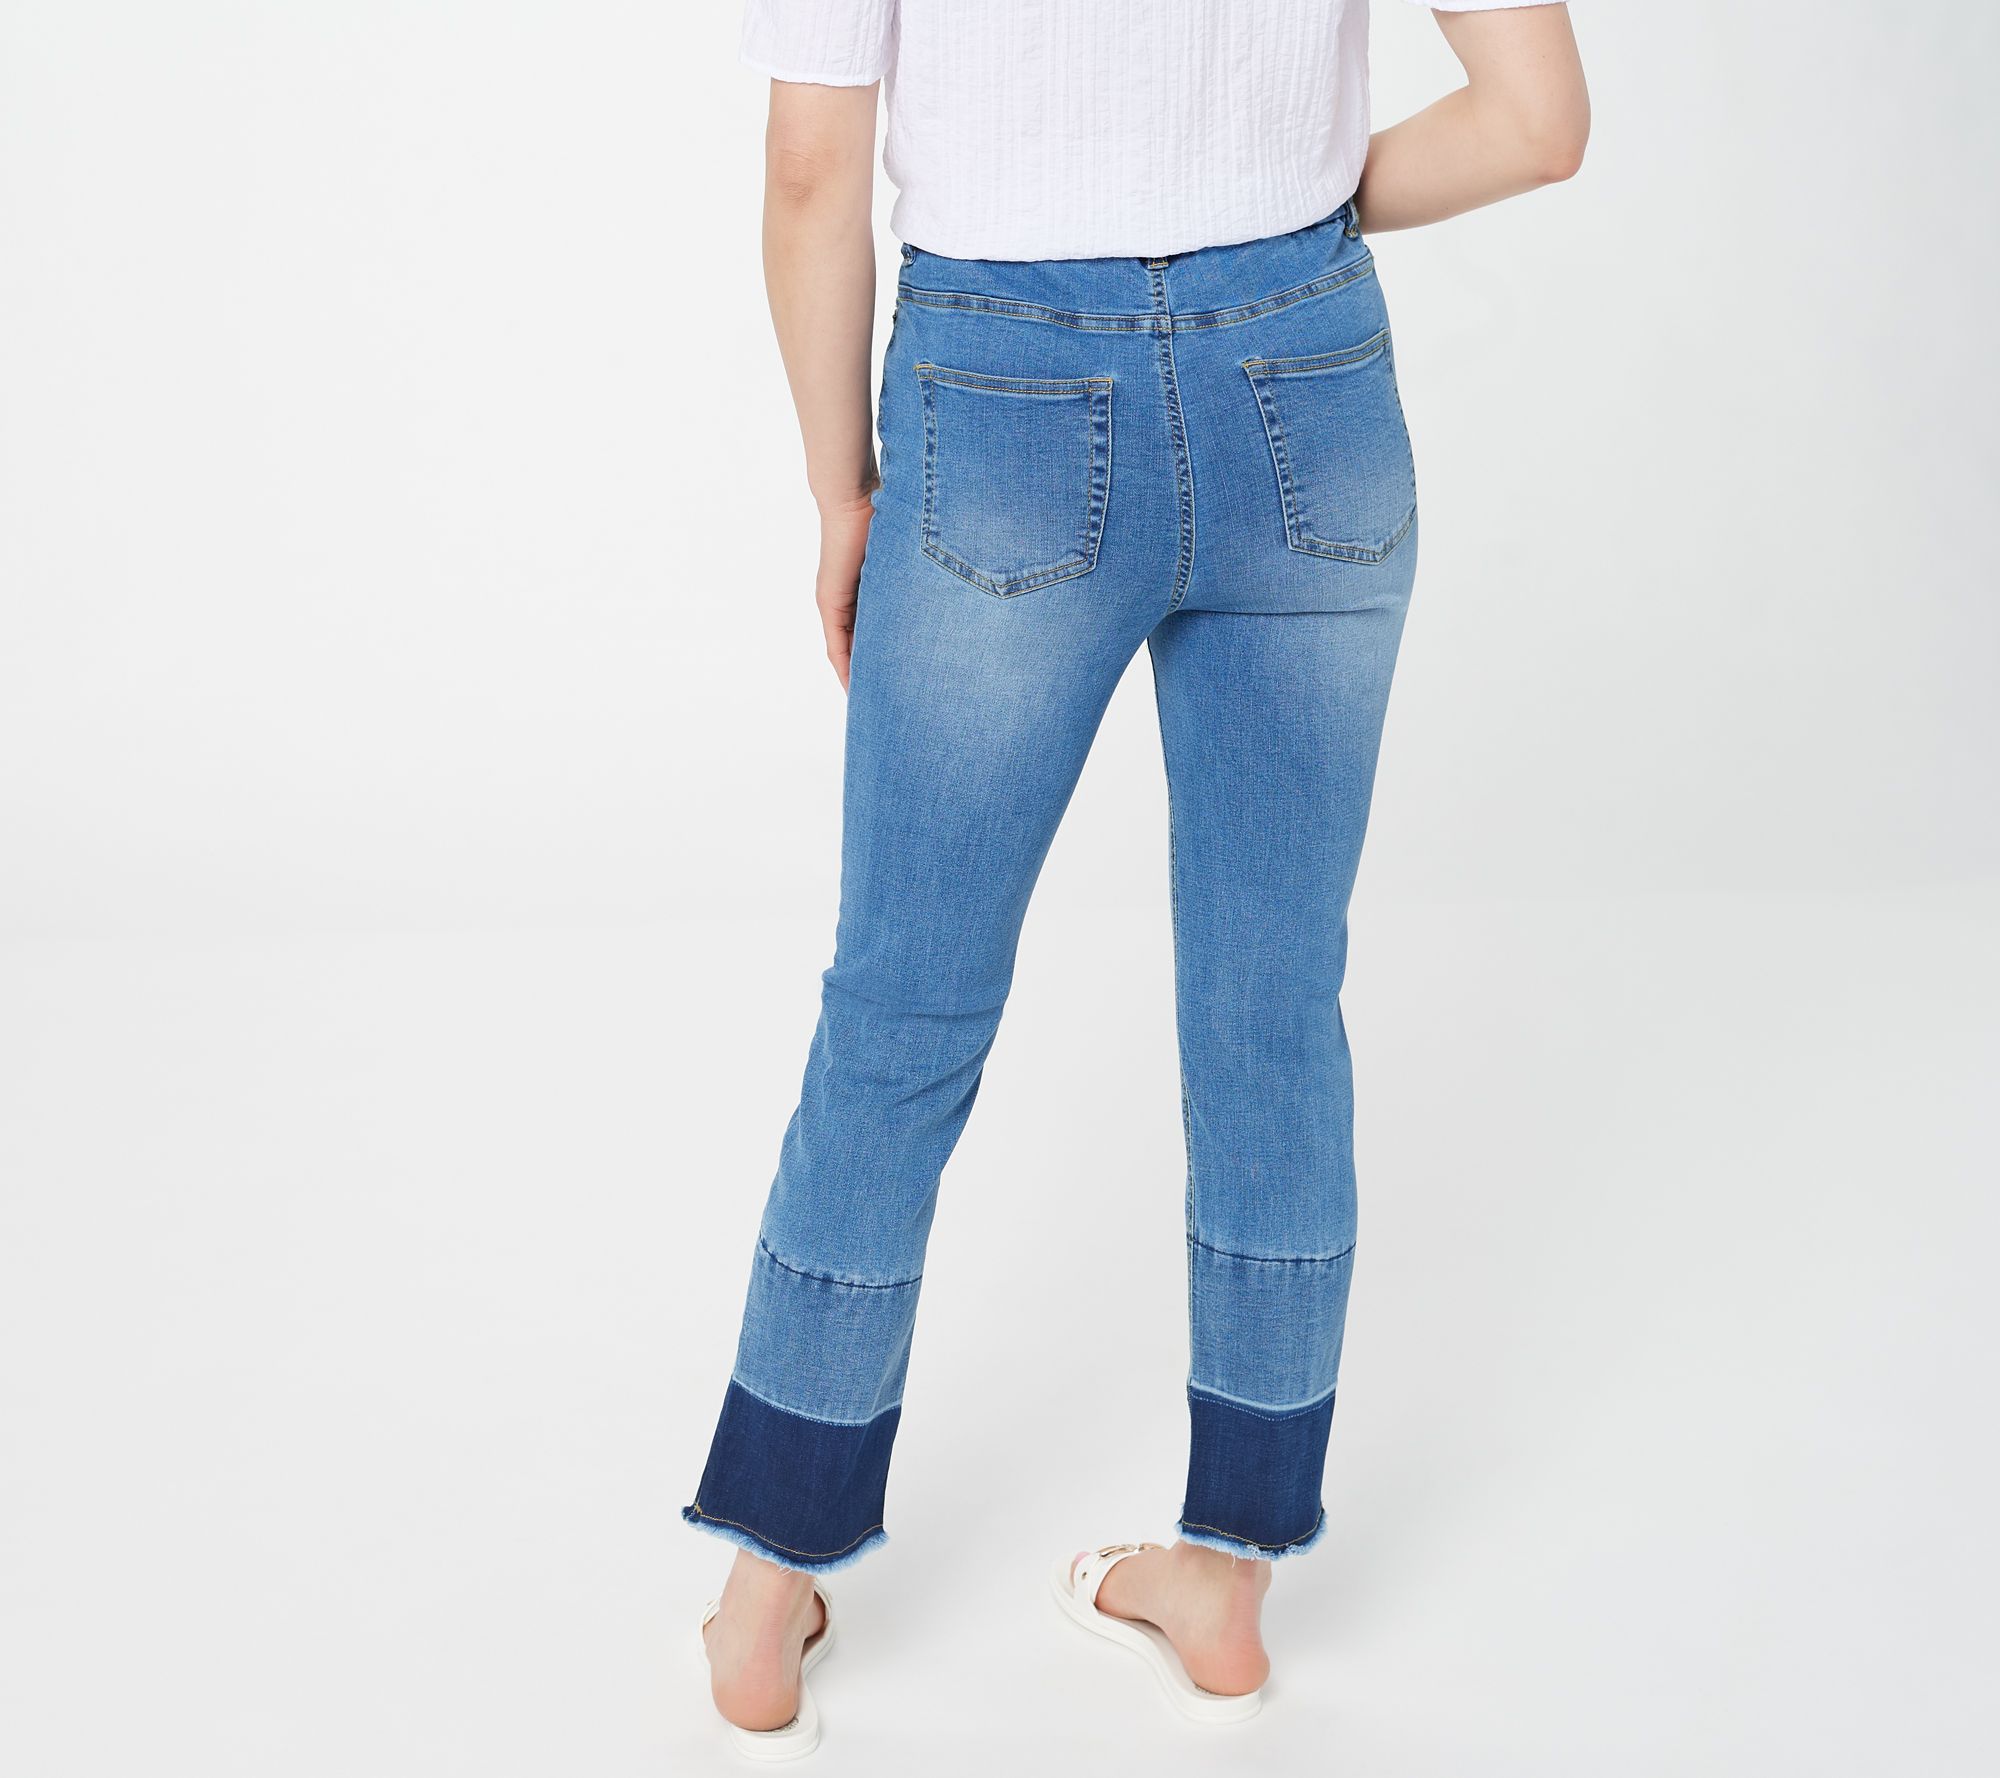 Denim & Co. Easy Stretch Denim Ankle Jeans with Released Hem - QVC.com